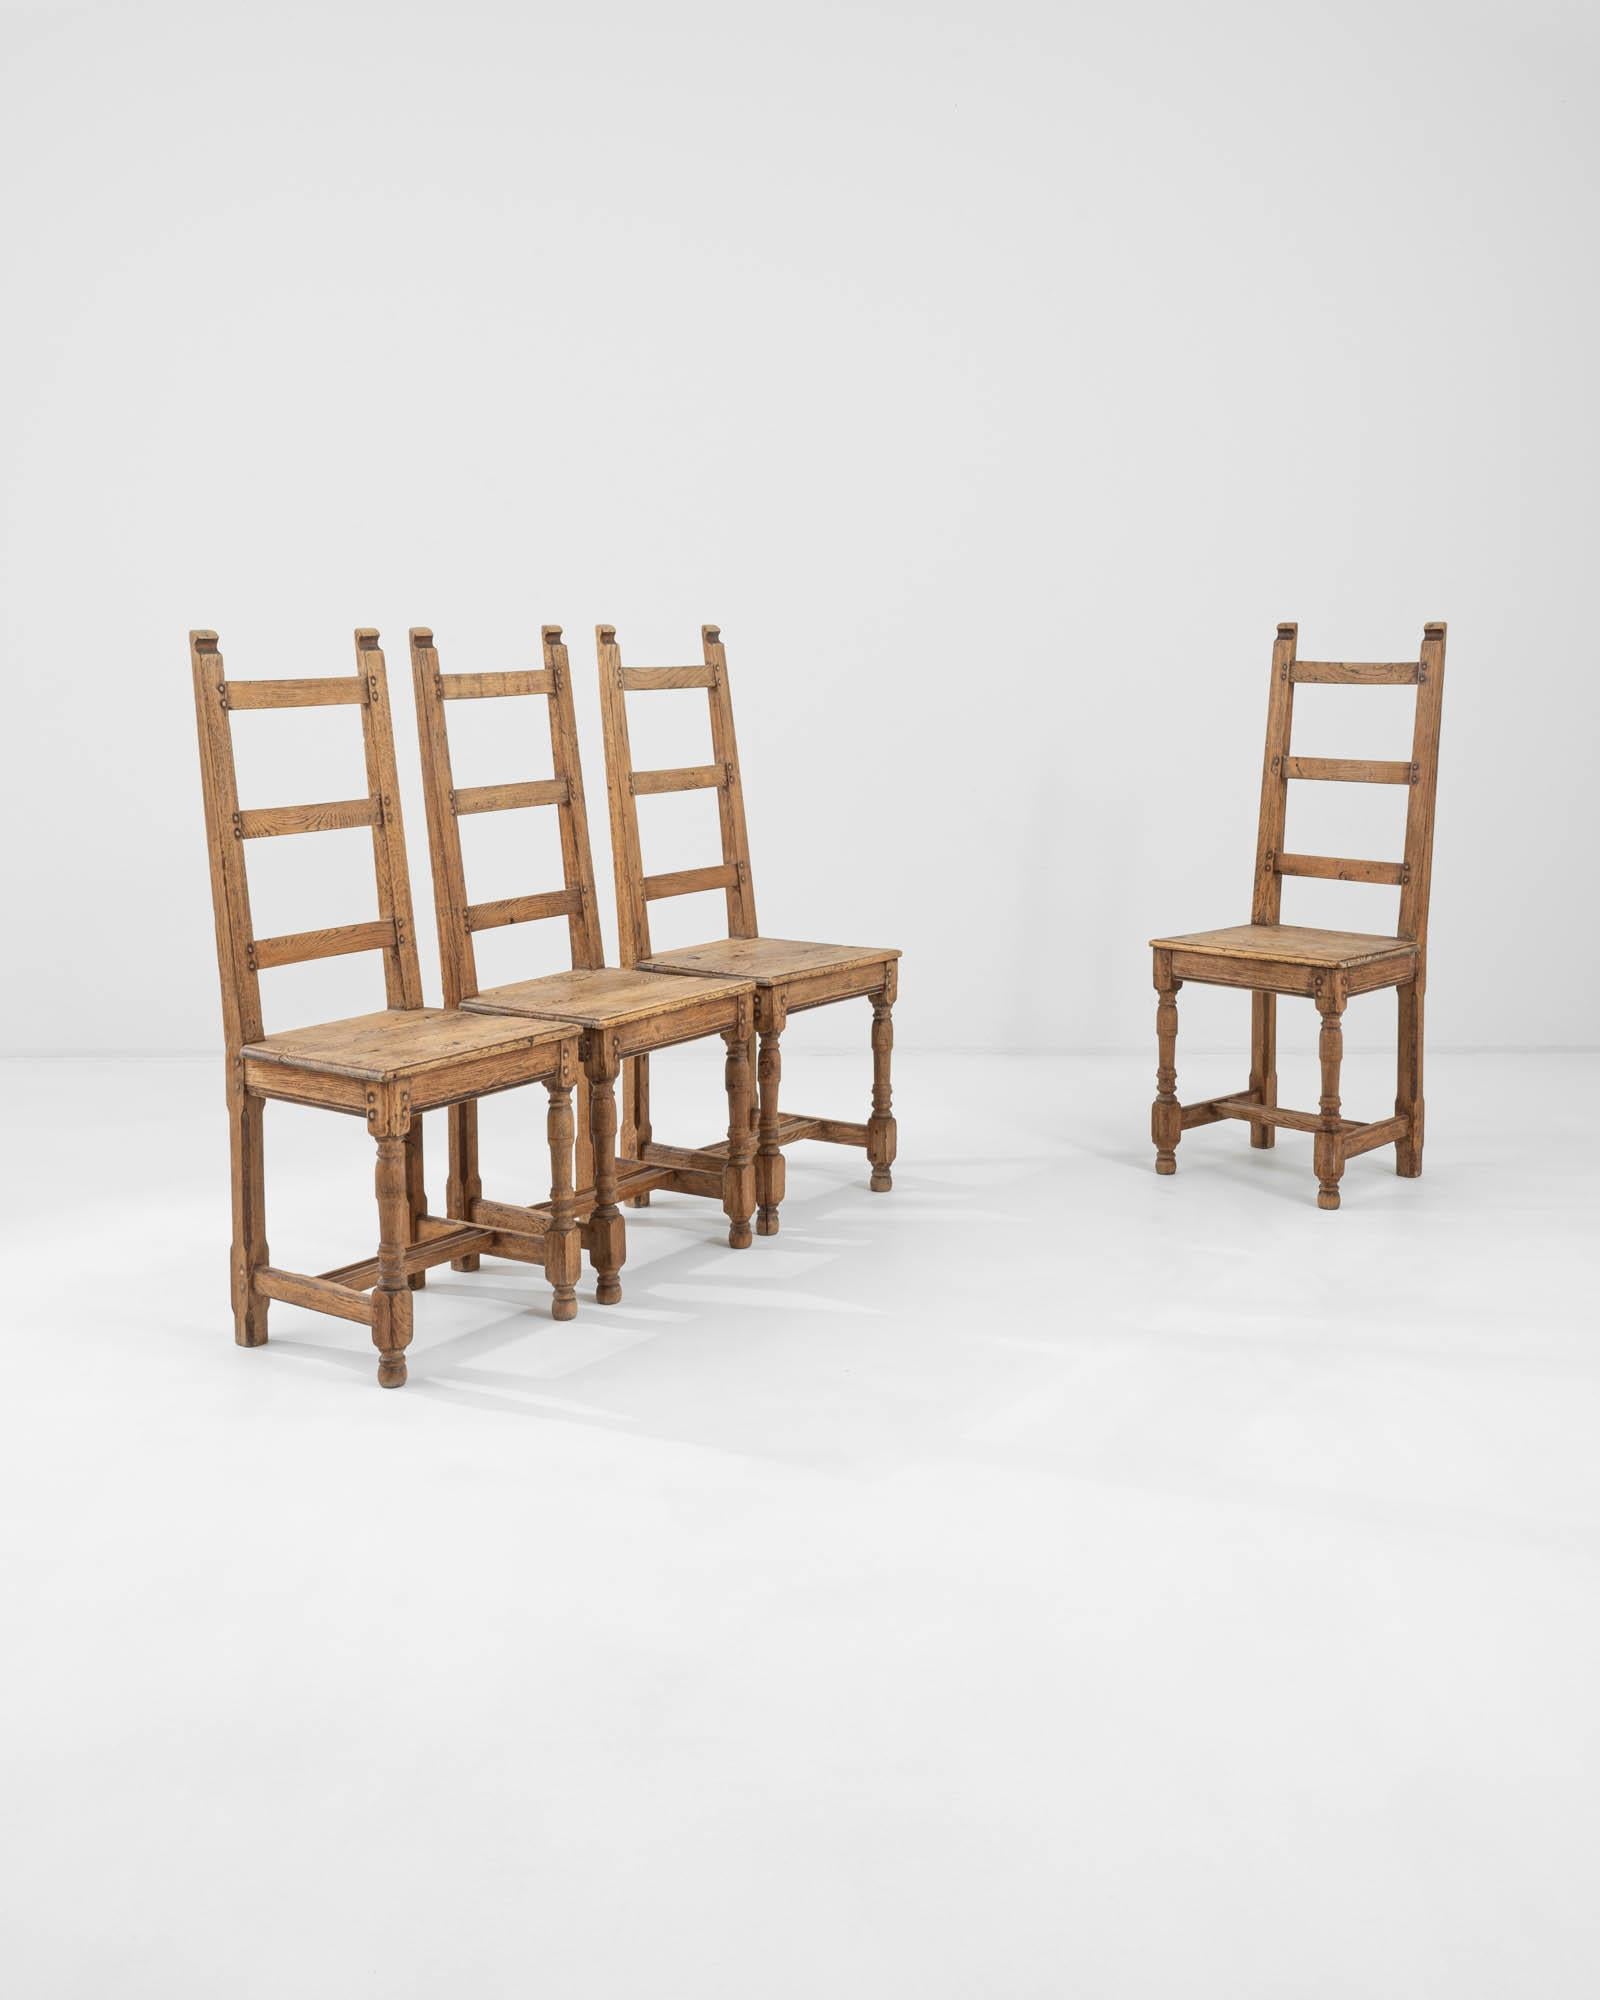 A set of wooden dining chairs created in 19th century France. Gleaming, rich brown hardwood composed into a thoughtful and utilitarian construction characterizes these chairs as a farmhouse style staple. Charming dowel rod pegs, notched seat backs,